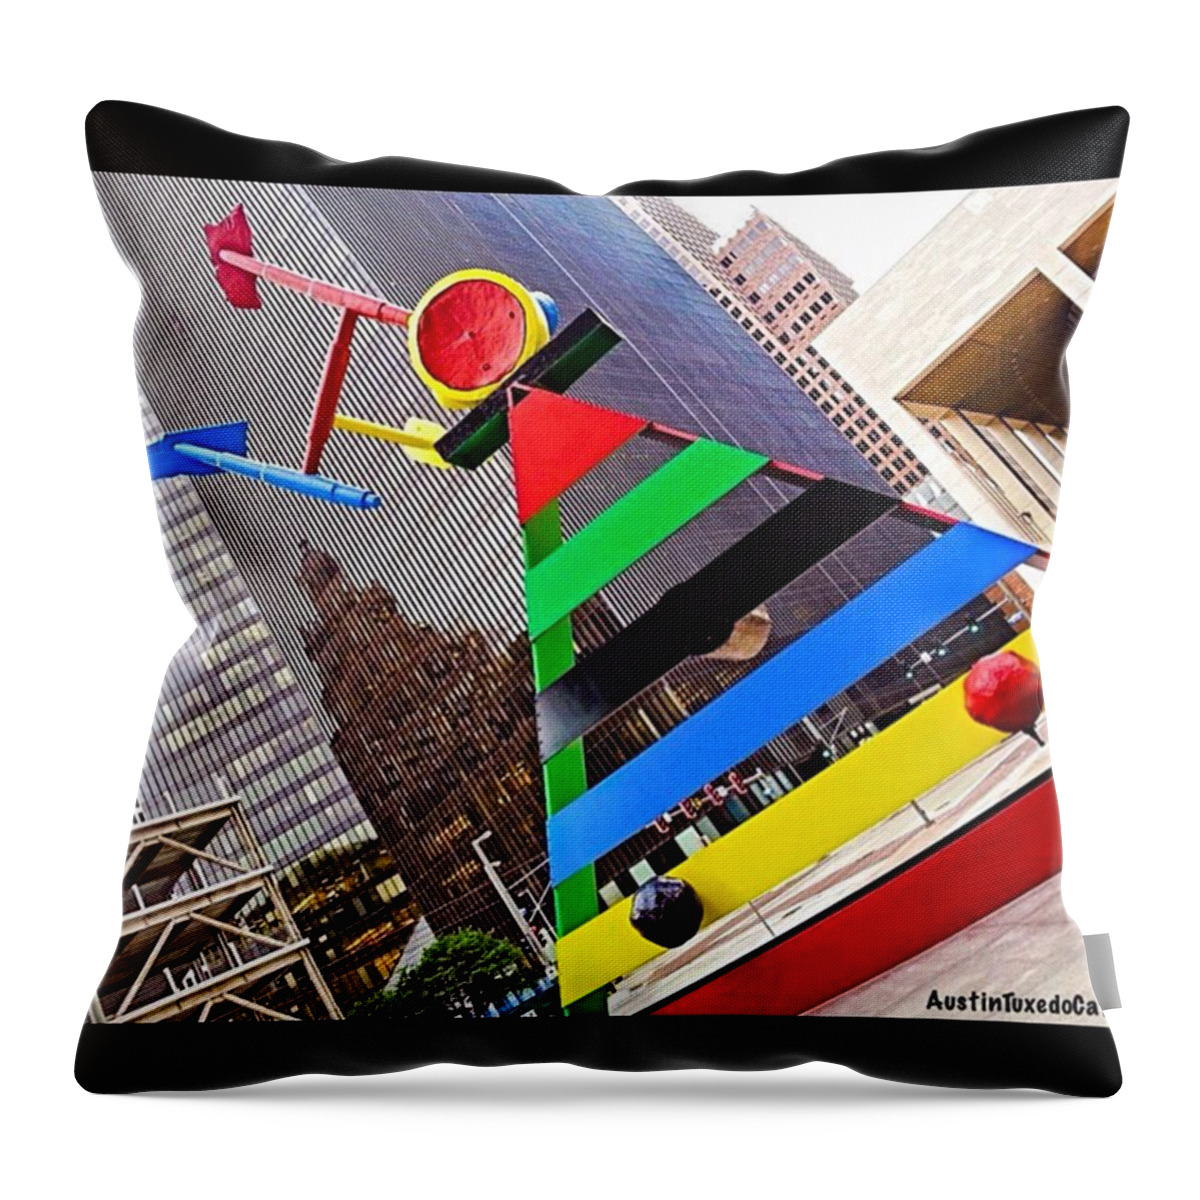 Houston Throw Pillow featuring the photograph The Best #sculpture In #houston. Have A by Austin Tuxedo Cat